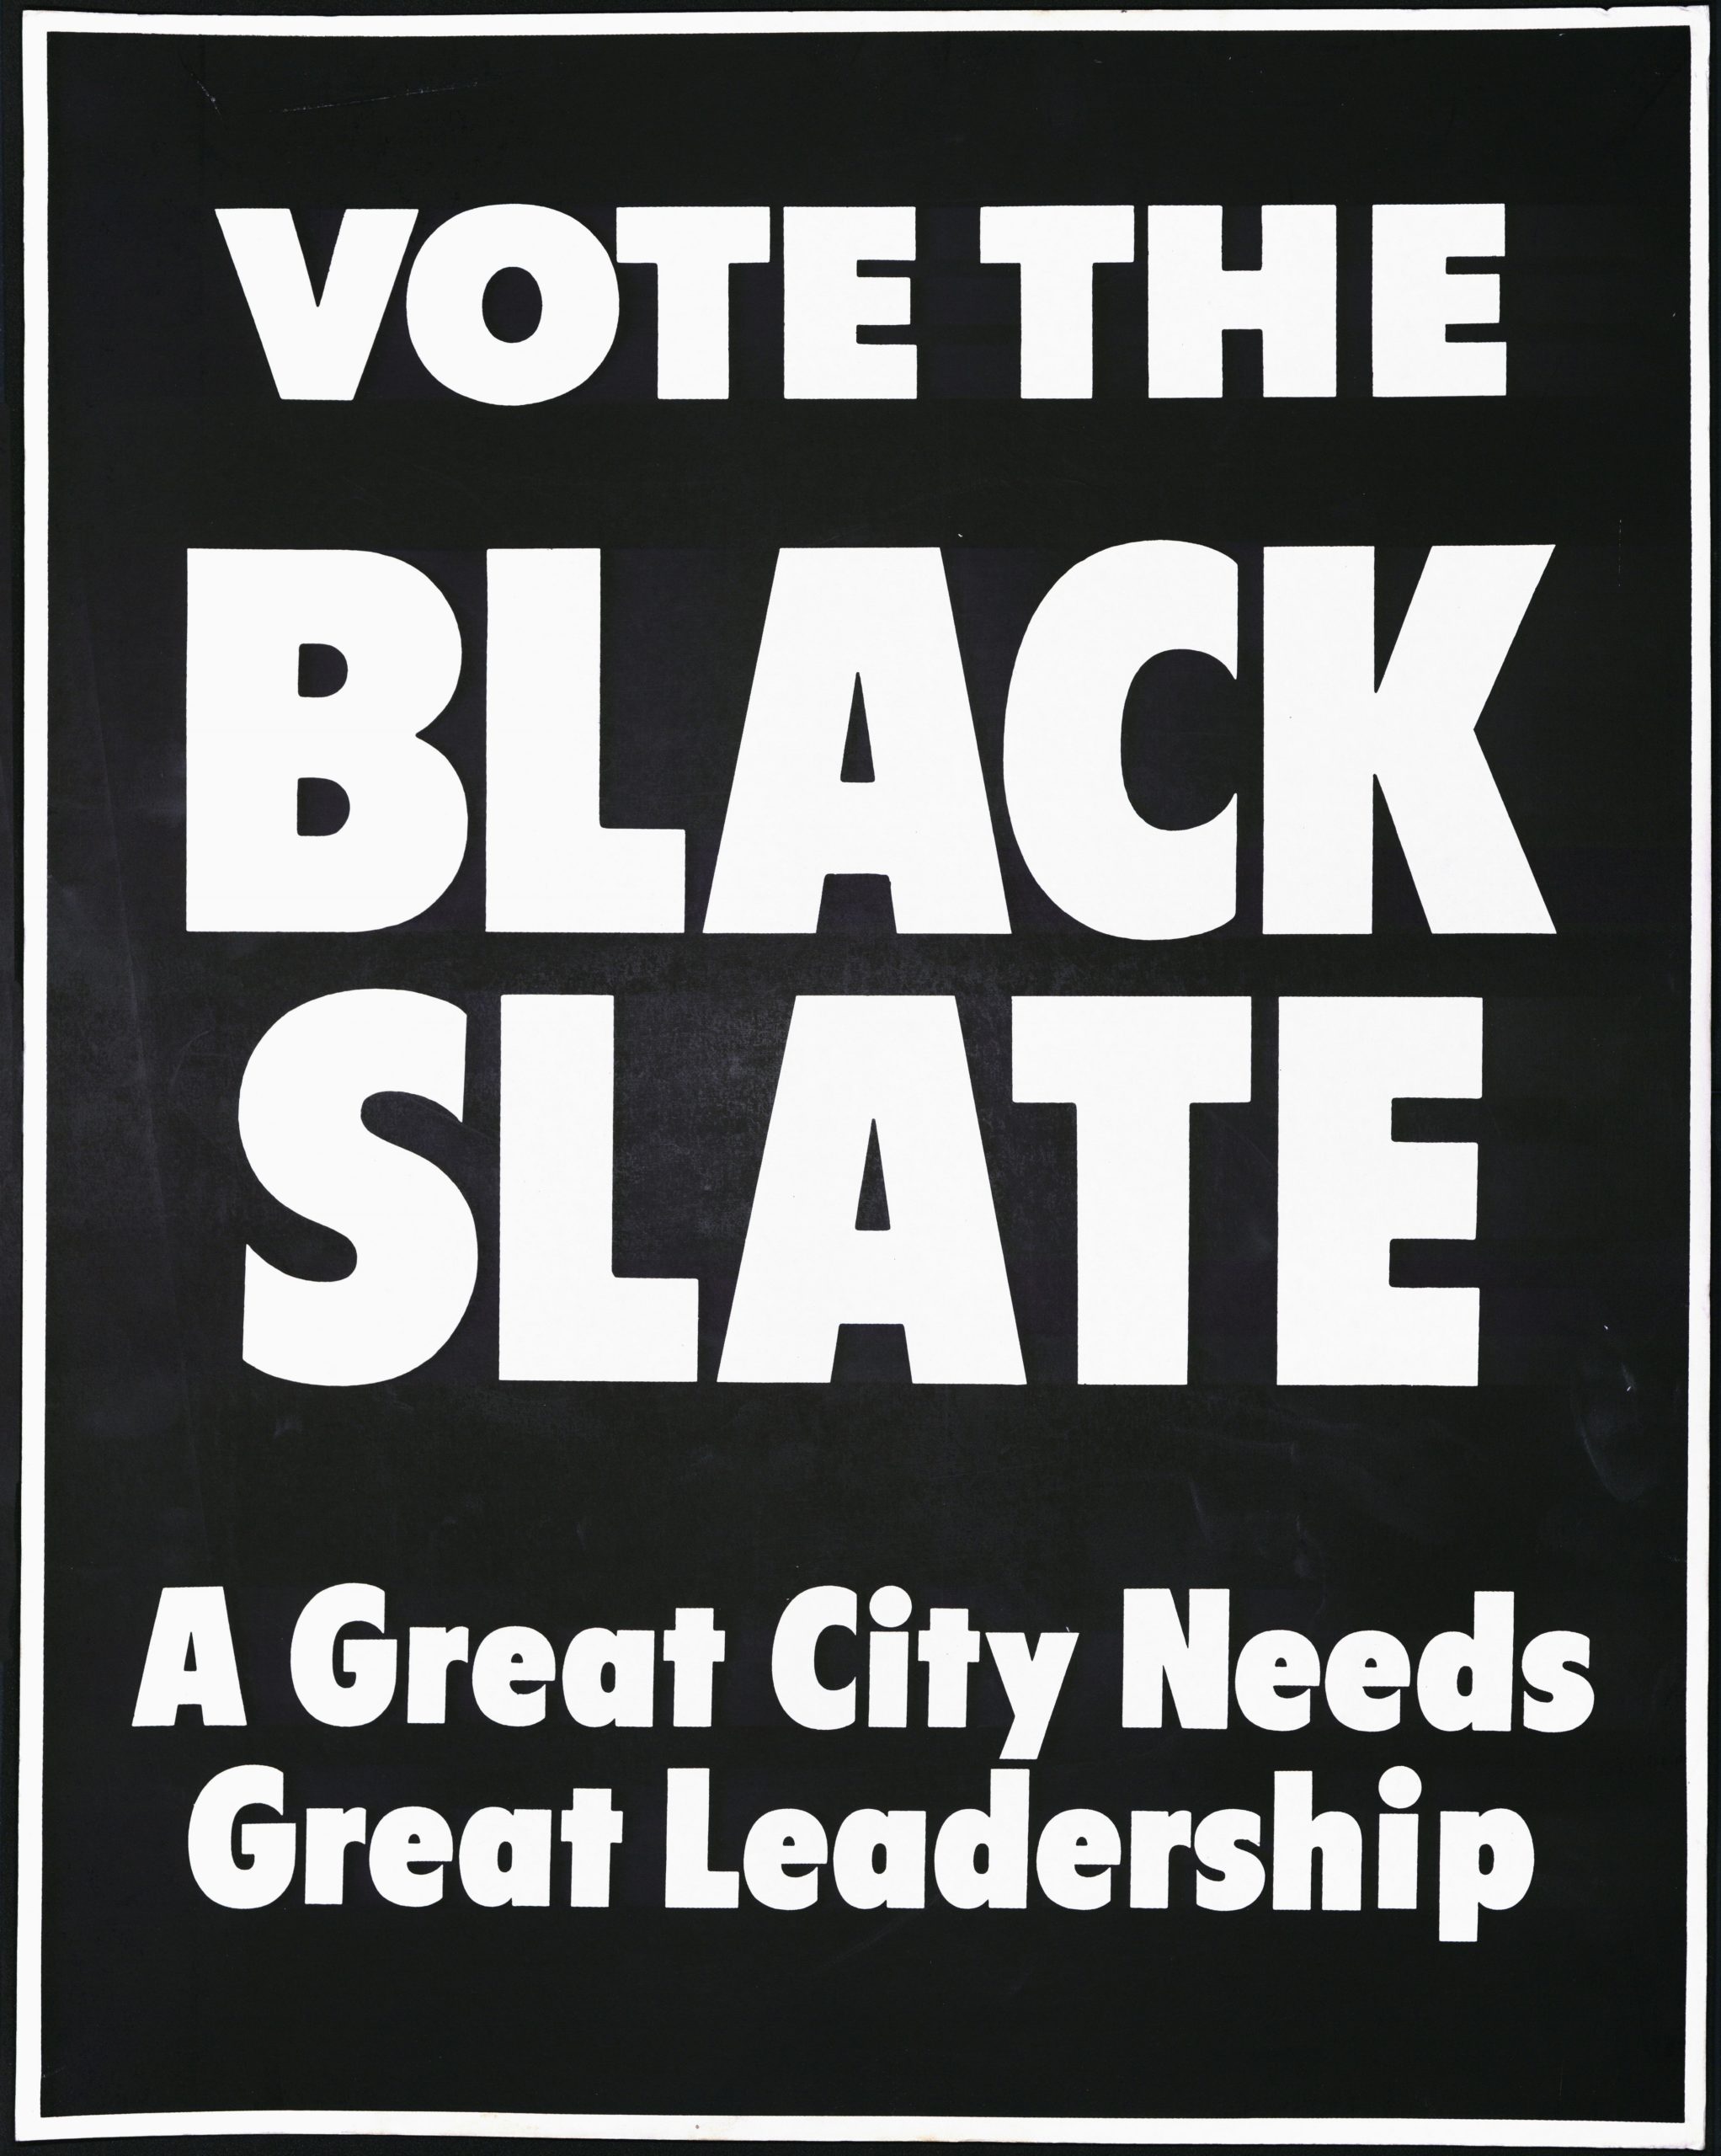 Vote the Black Slate, circa 1975Political Posters Collection